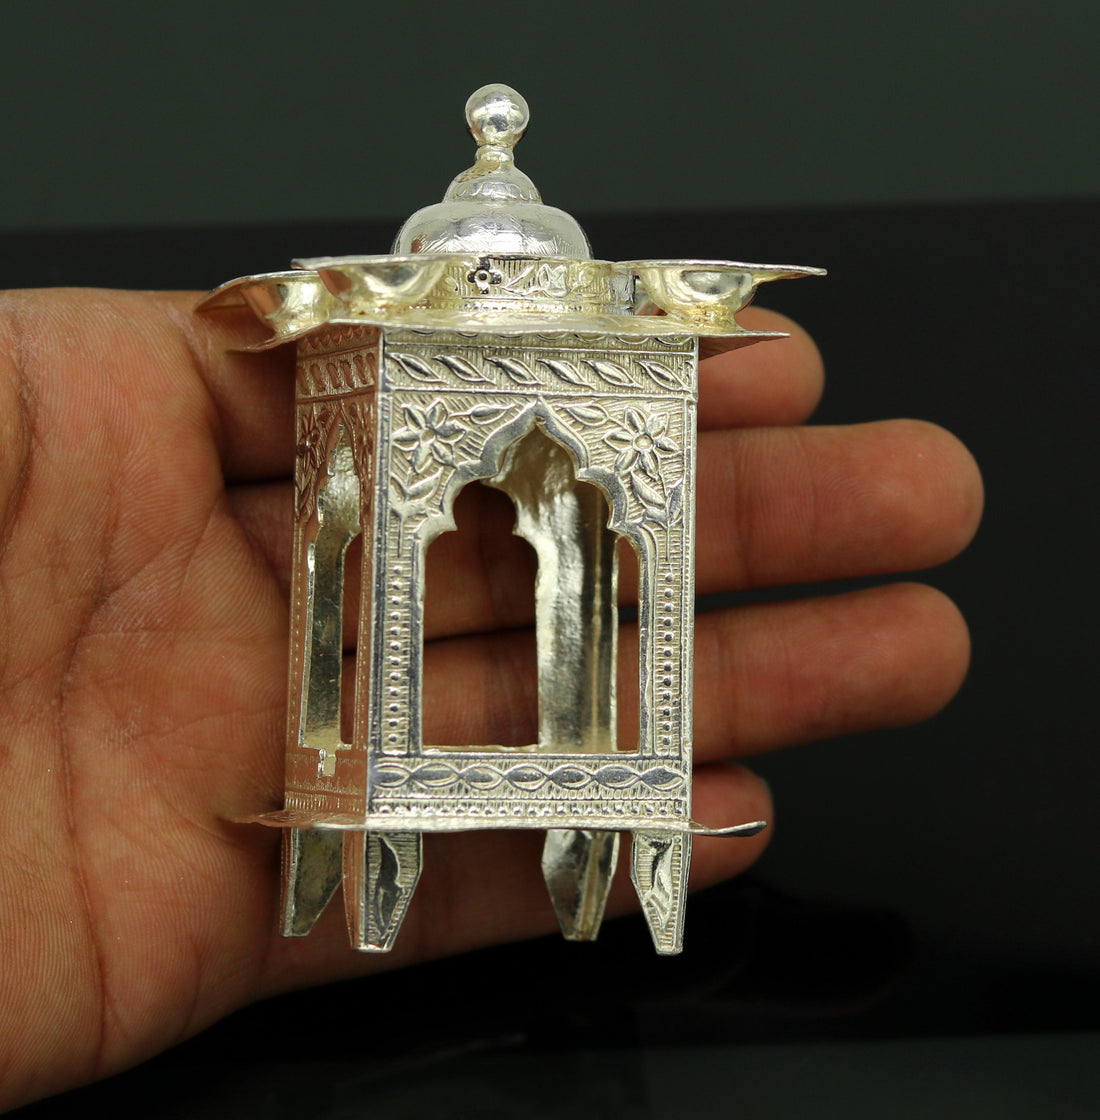 Sterling silver handmade amazing design home mini temple with oil lamp, amazing handcrafting work home decor temple art figurine  sst12 - TRIBAL ORNAMENTS